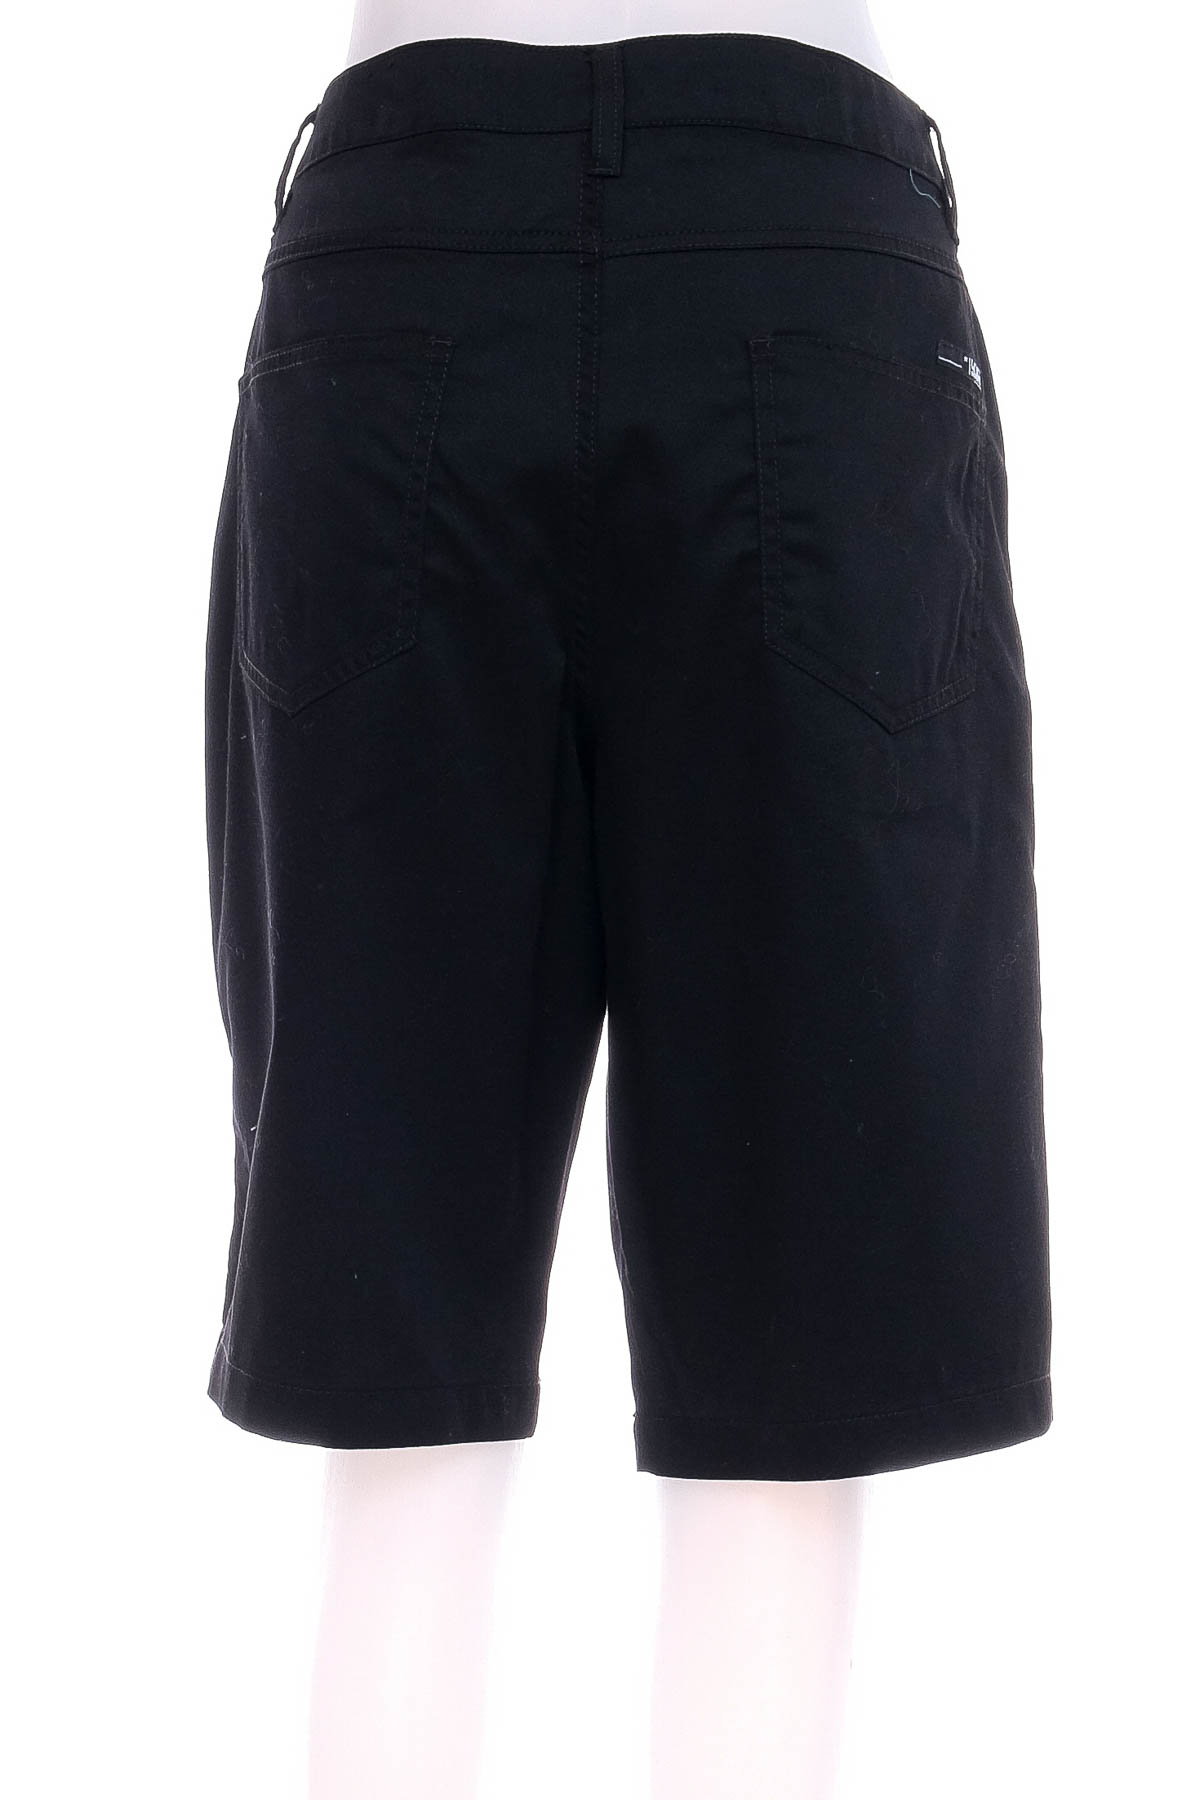 Men's shorts - Much More - 1